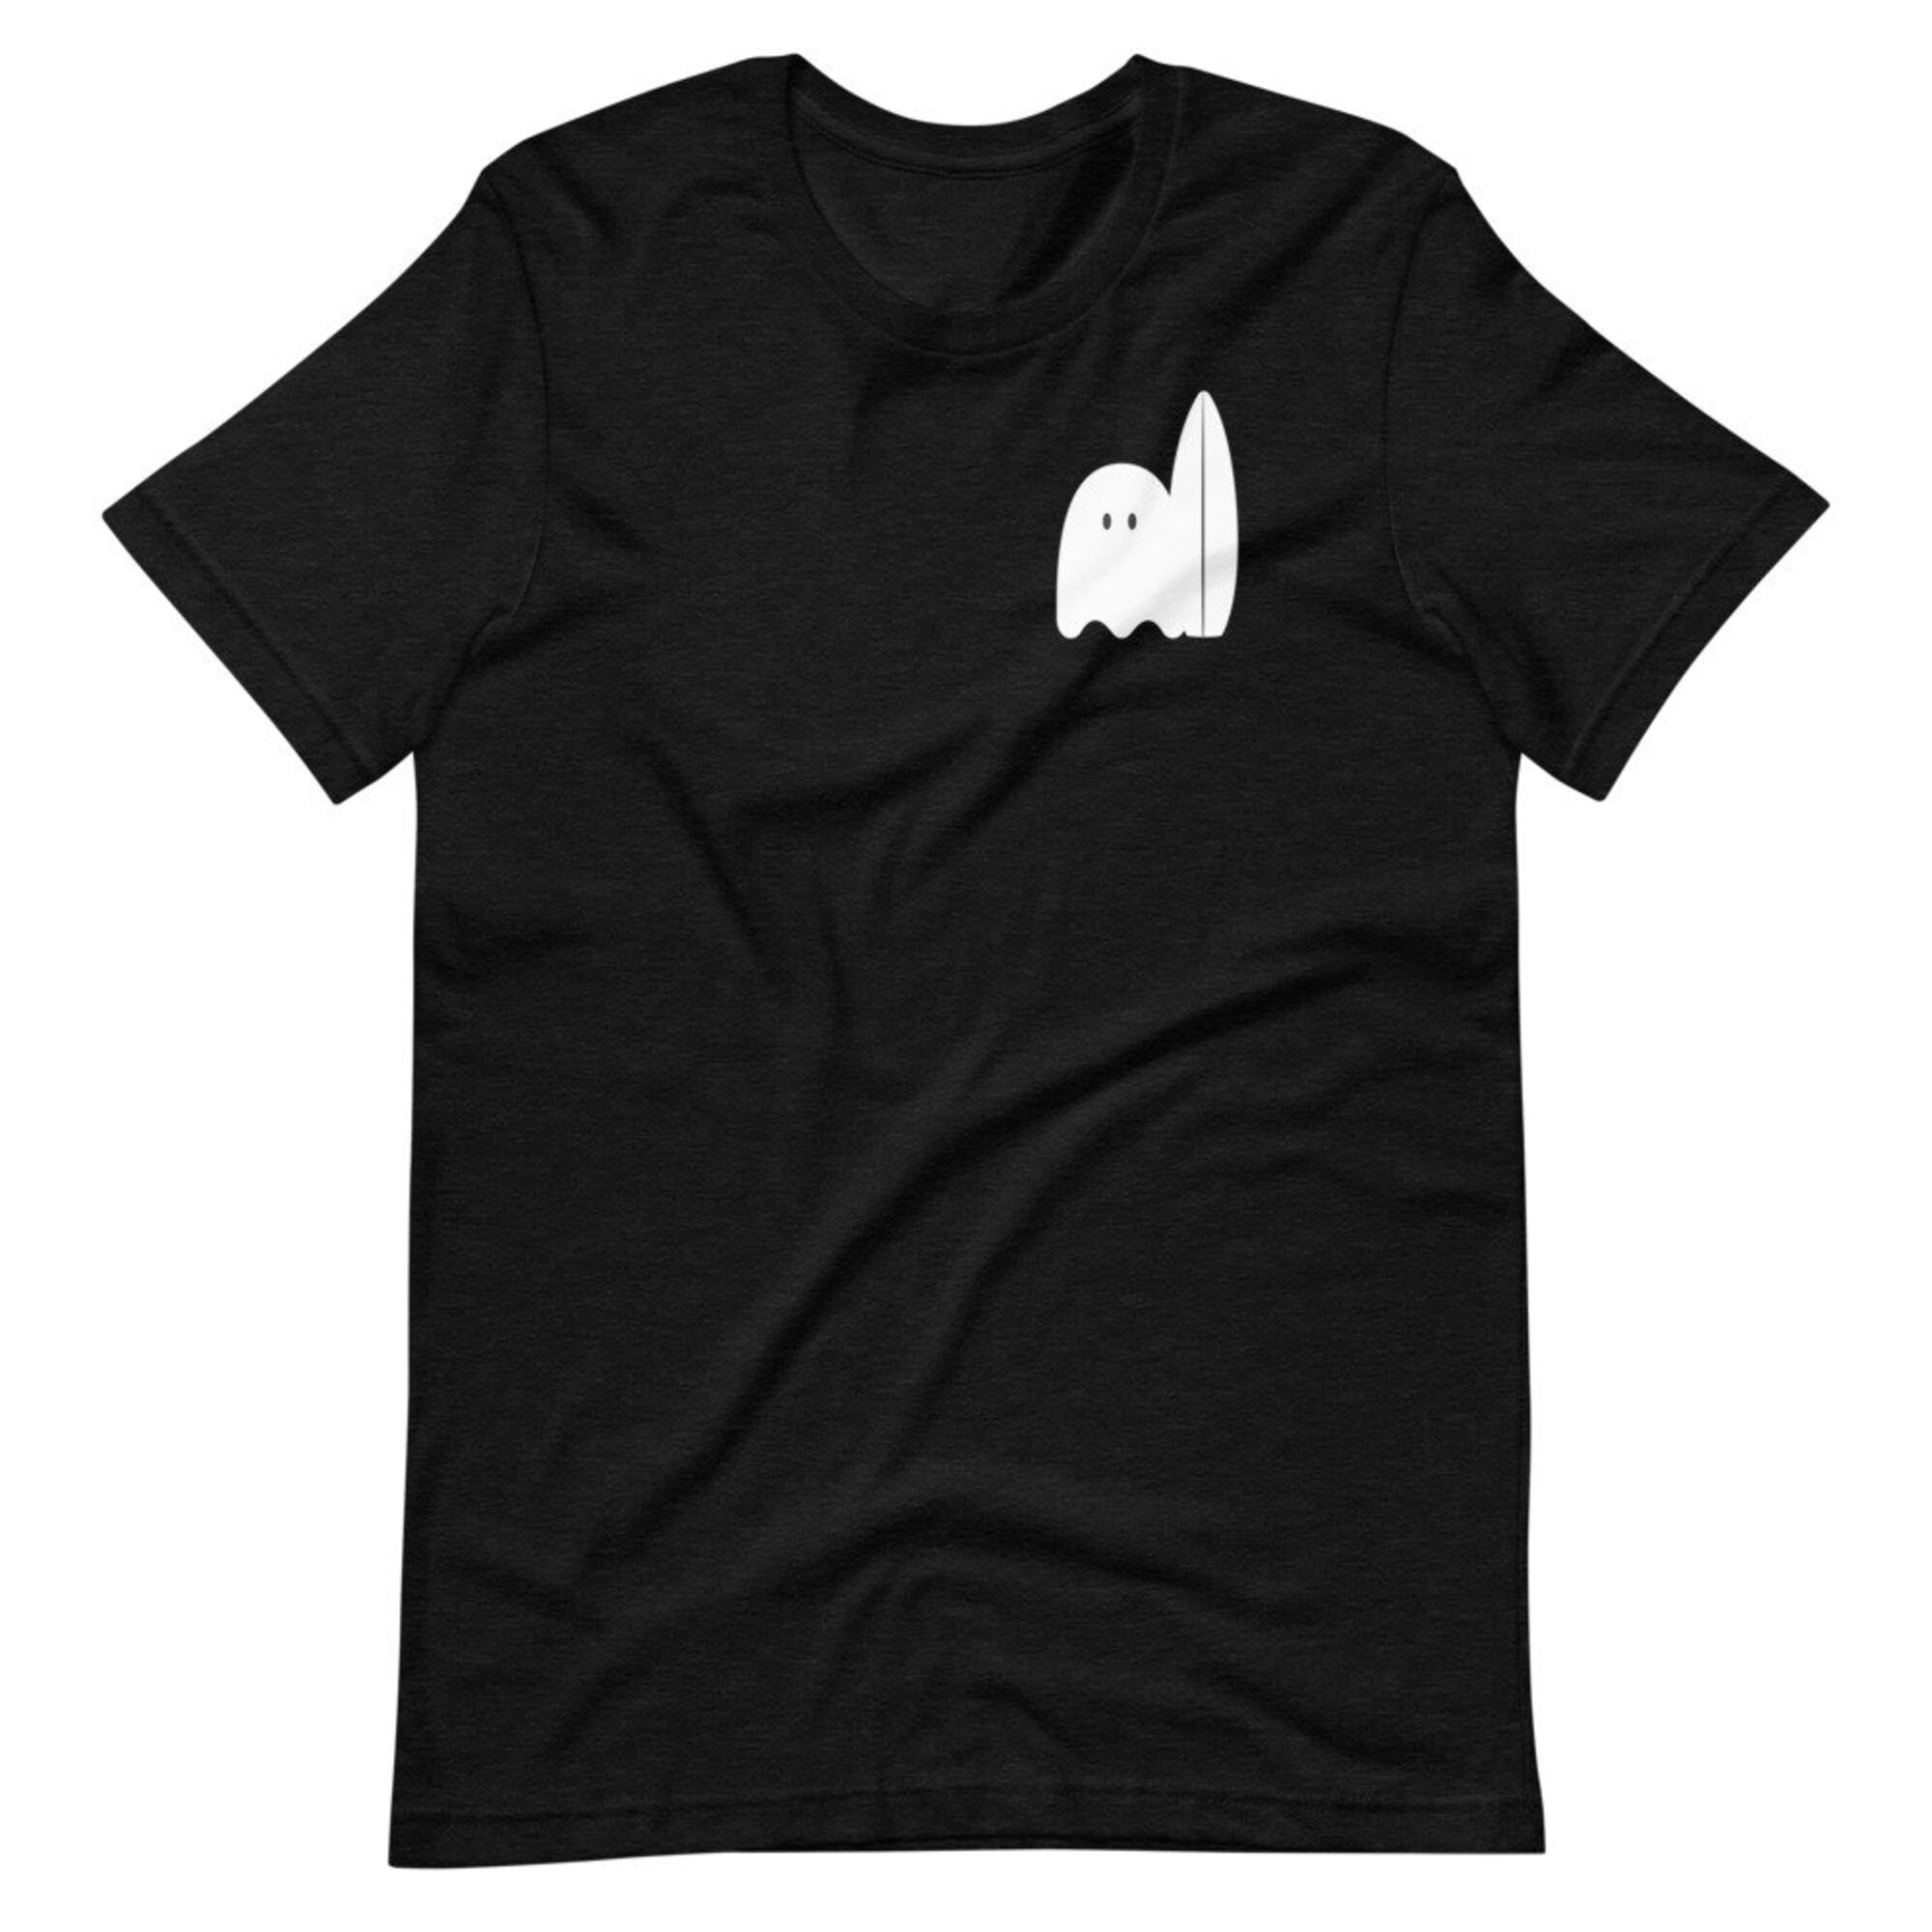 Discover Surfer Ghost T-Shirt, Ghost Pocket Shirt, Cute Ghost Shirt, Surfer Shirt, Halloween Shirt, Funny Surf Shirt, Ghost Shirt